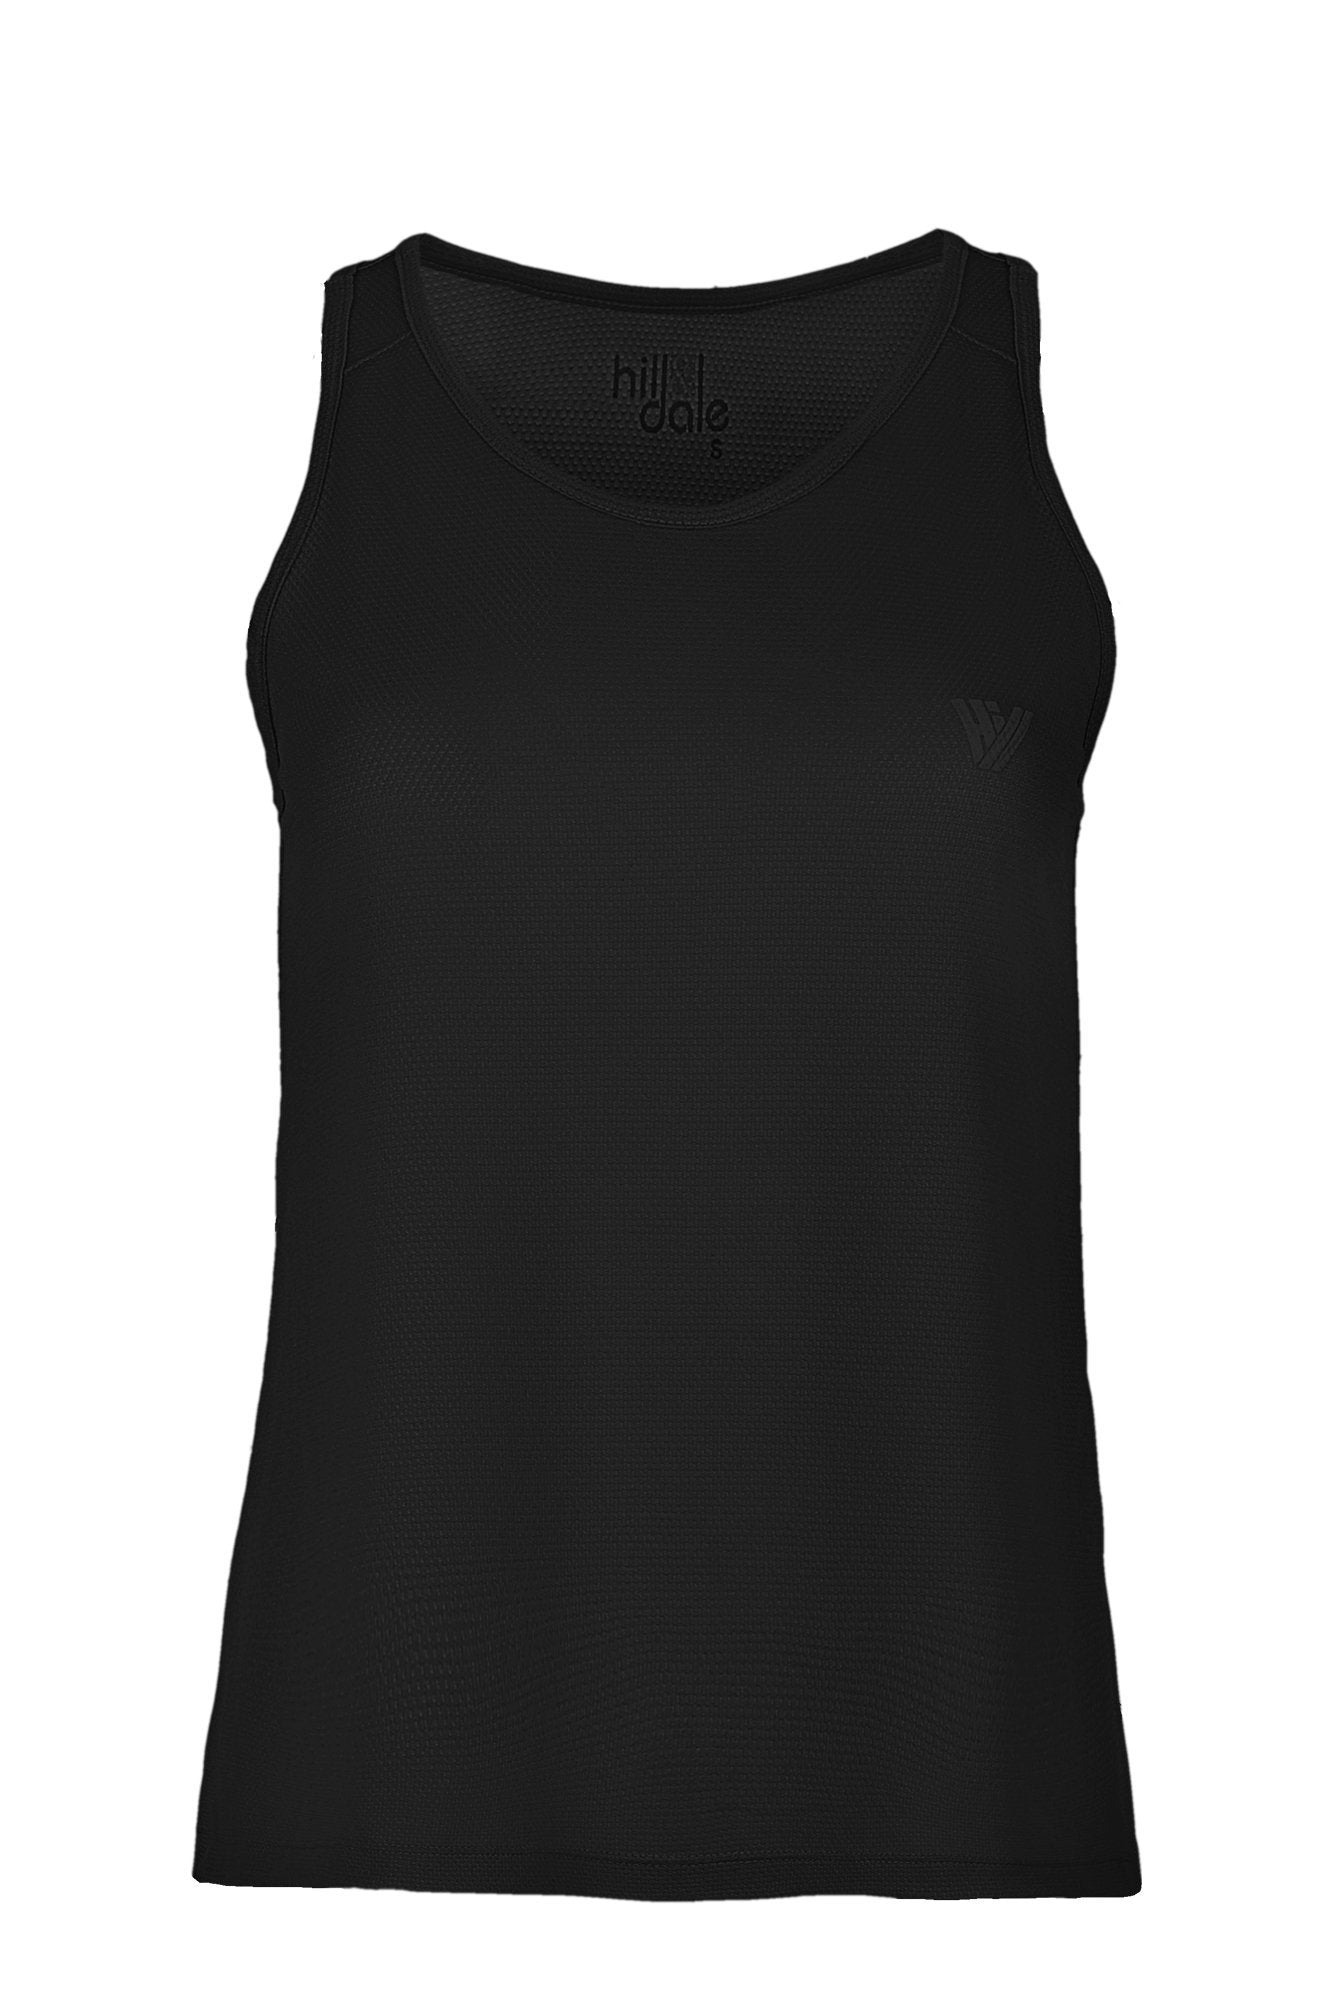 hill & dale run singlet top hill & dale black XS 100% Polyester